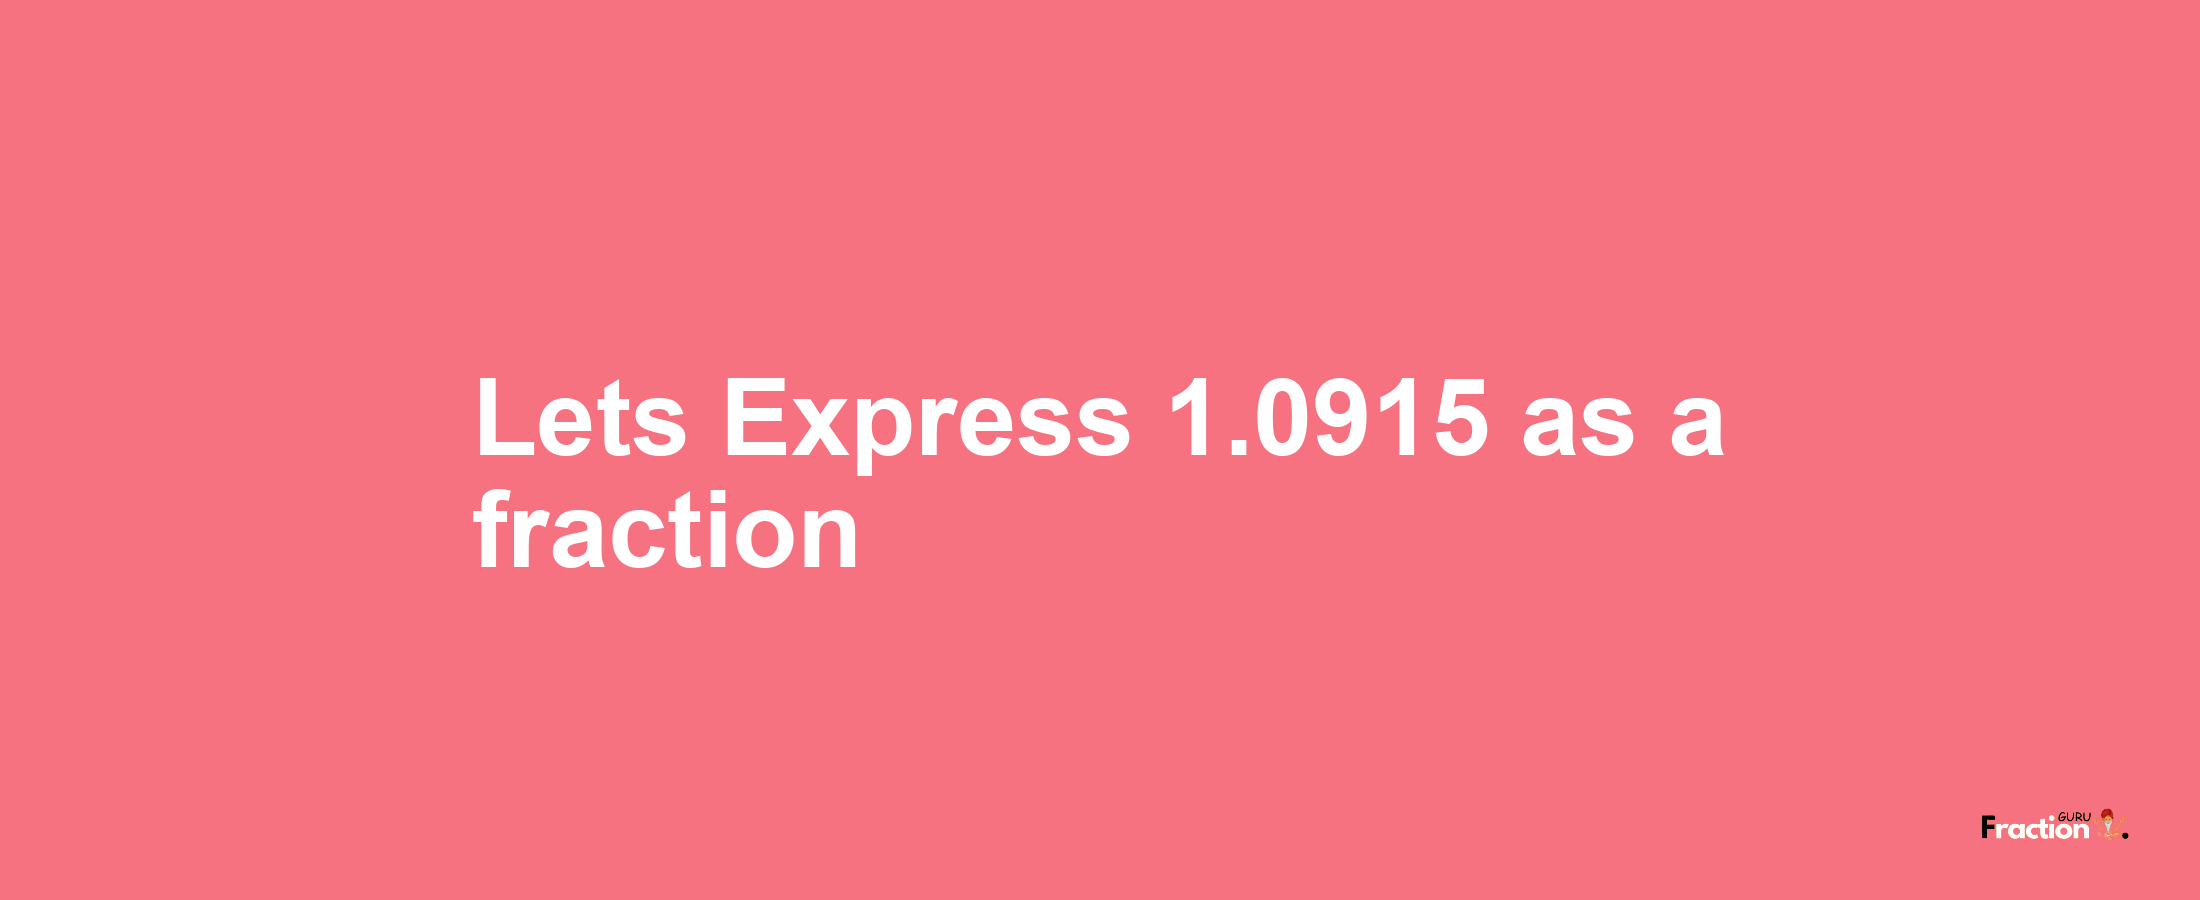 Lets Express 1.0915 as afraction